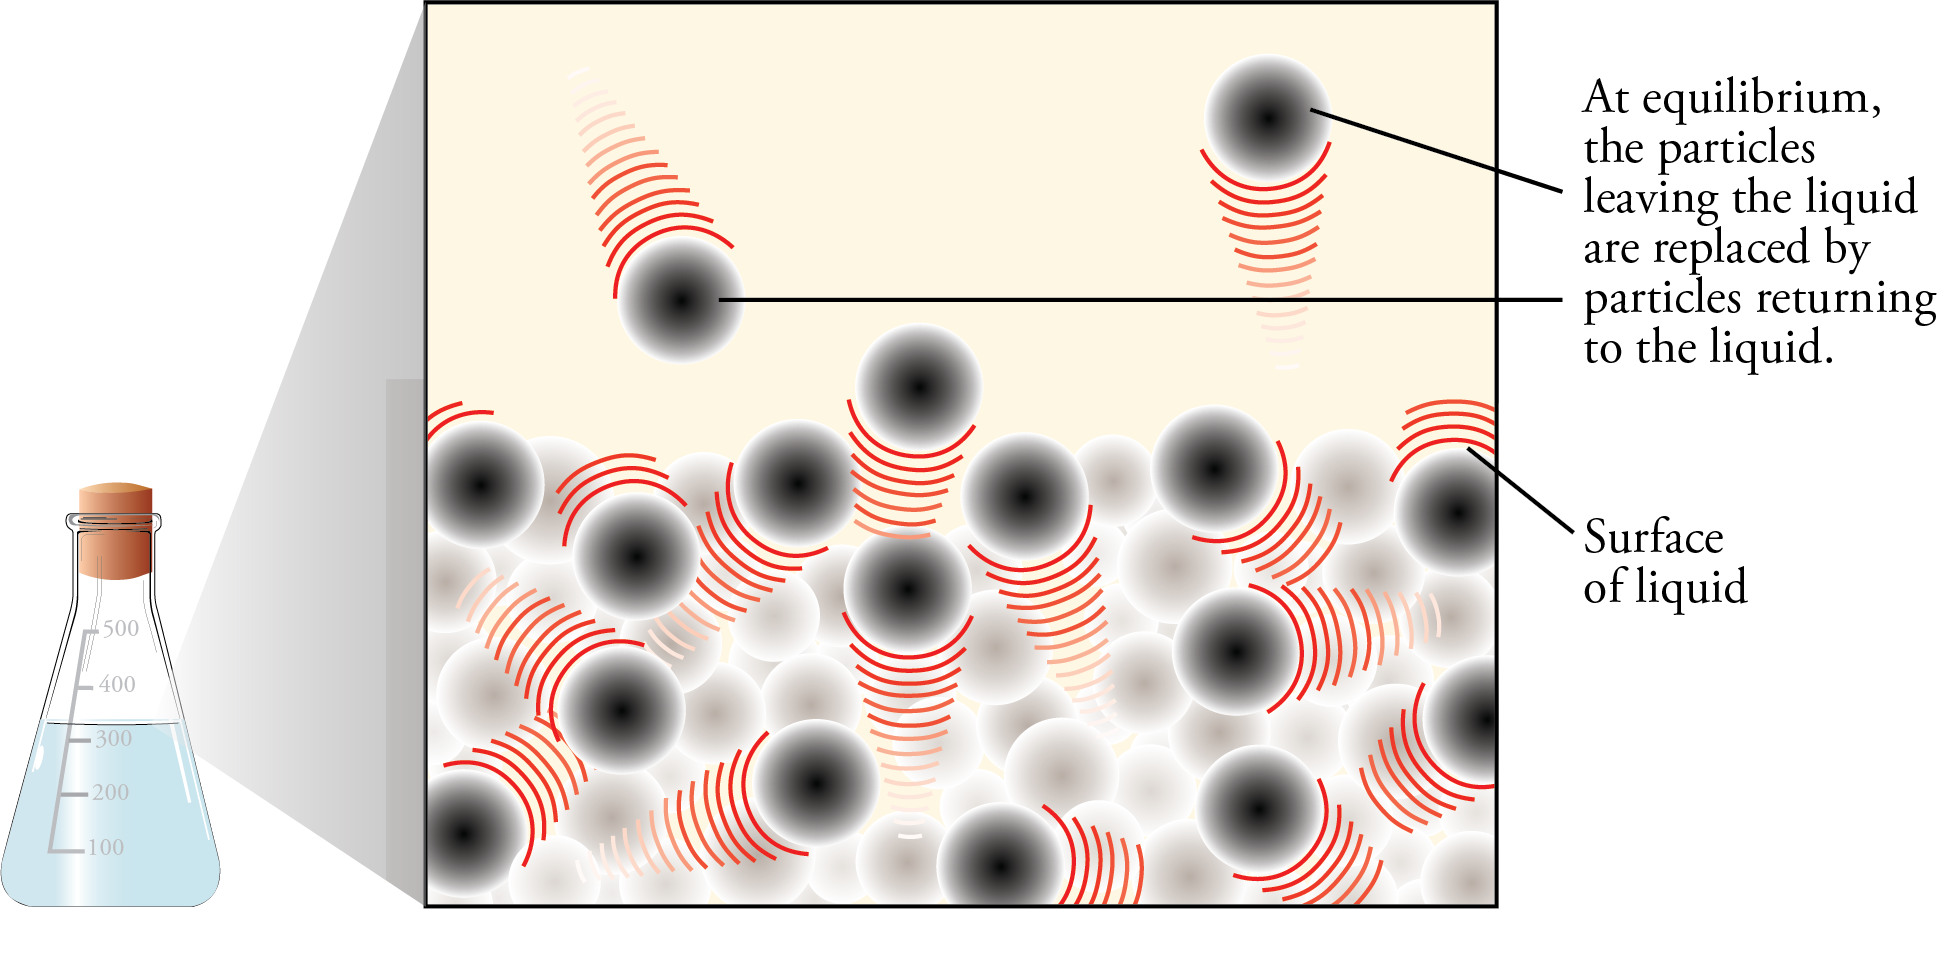 Image of a particle image showing the balancing of evaporation and condensation